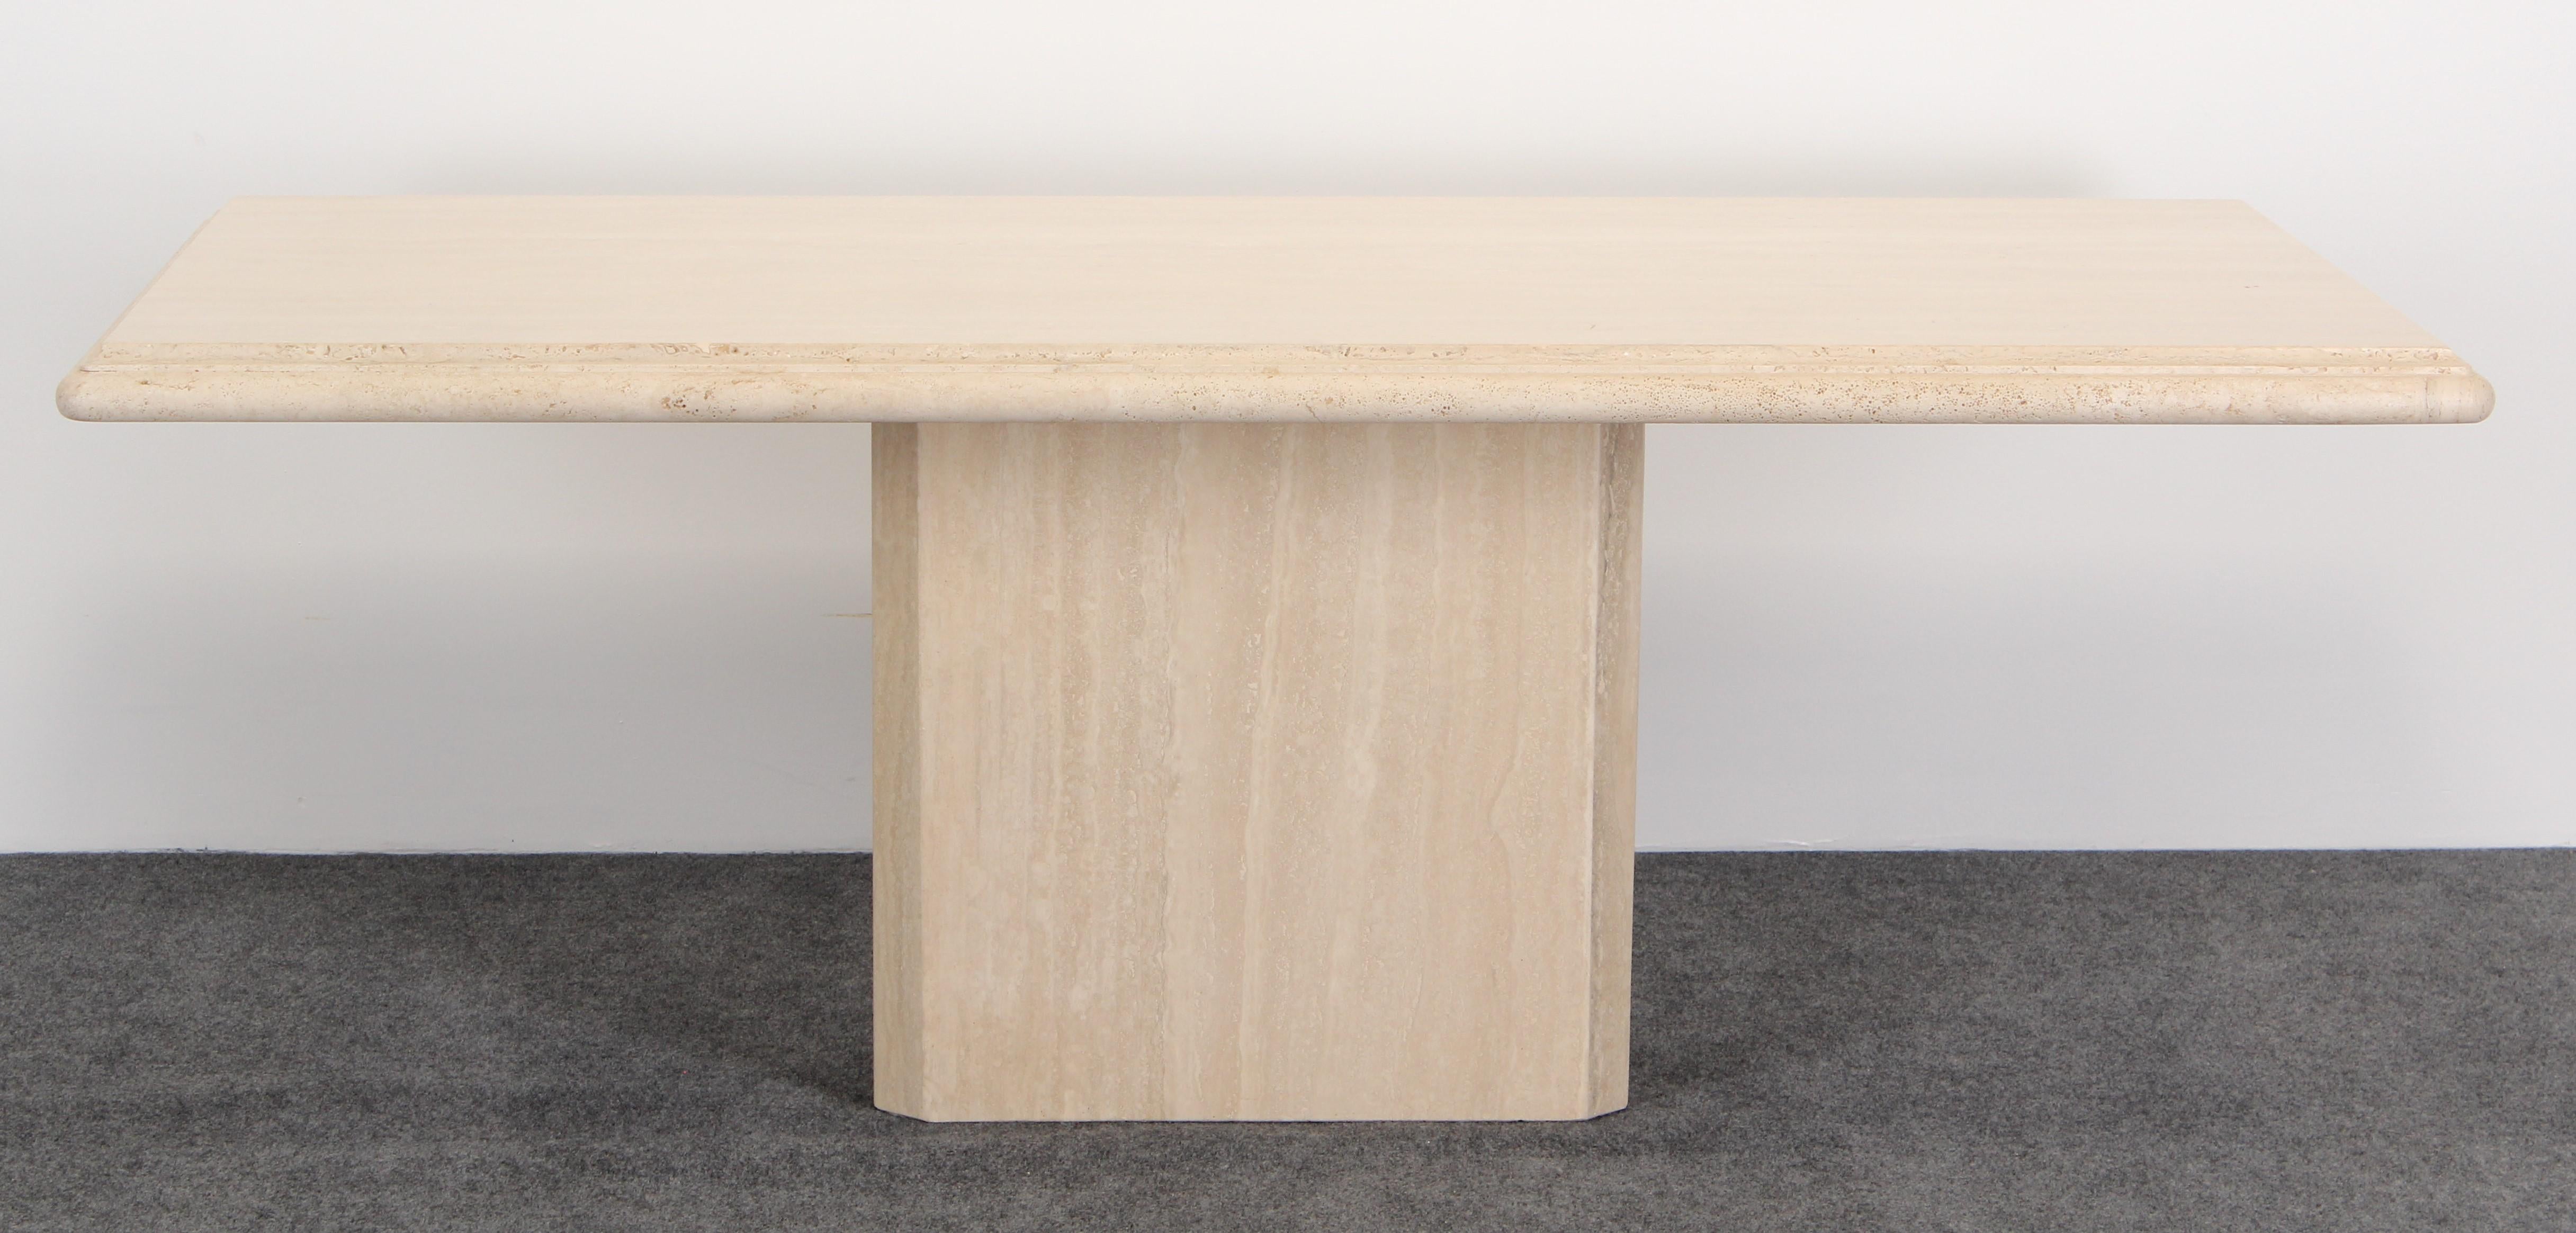 A stunning travertine marble dining table with beveled edges on a rectangular base. This set is in two pieces for easy assemblage. Very good condition.